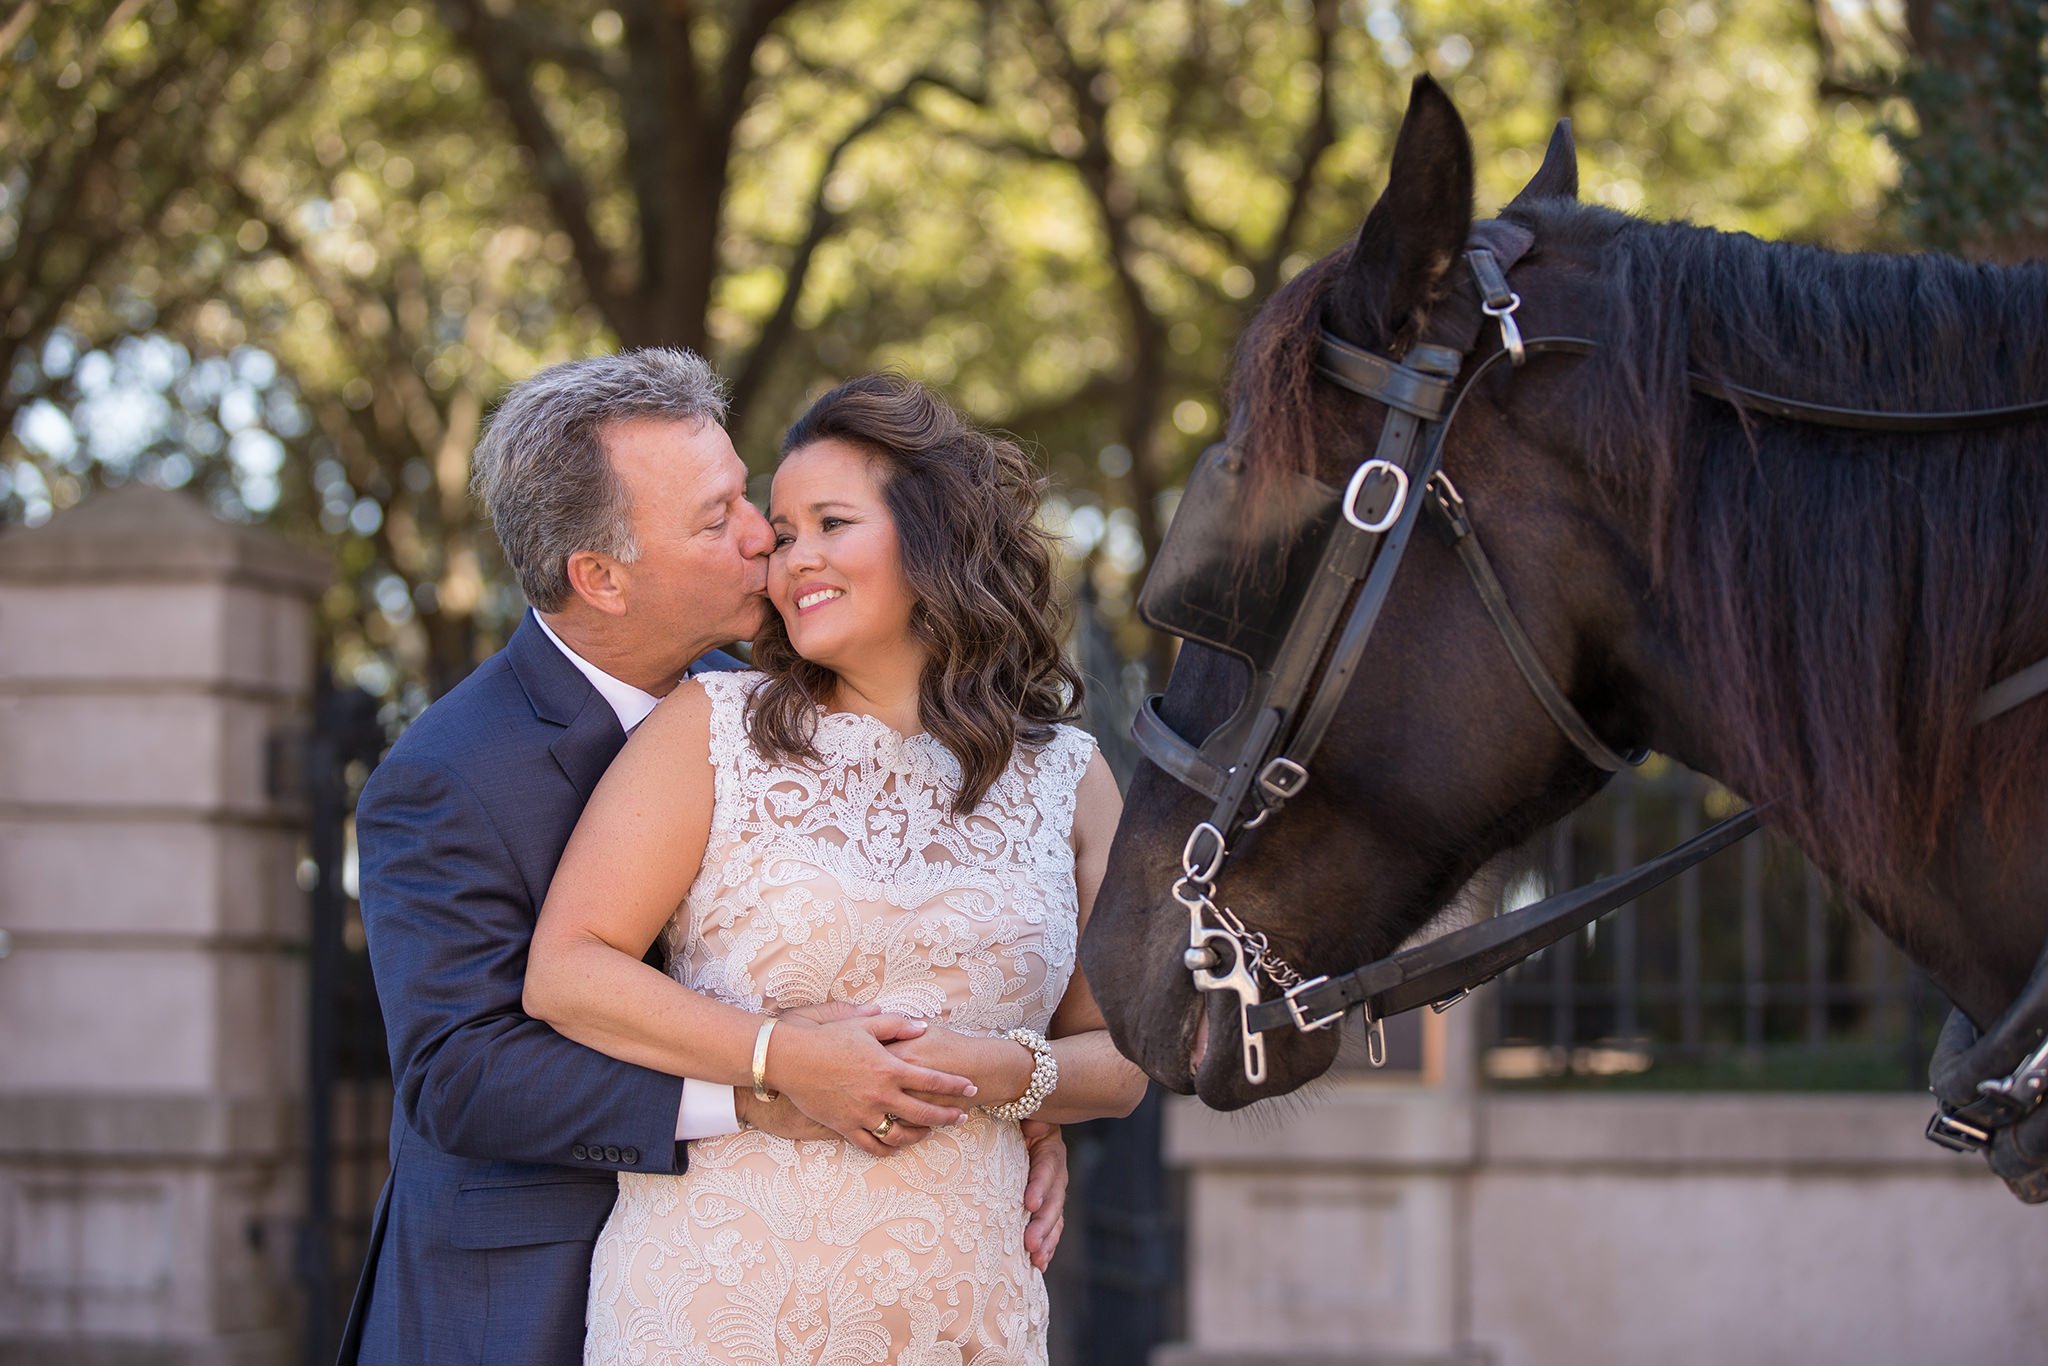 The couple is standing near a horse. The groom is hugging and kissing the bride